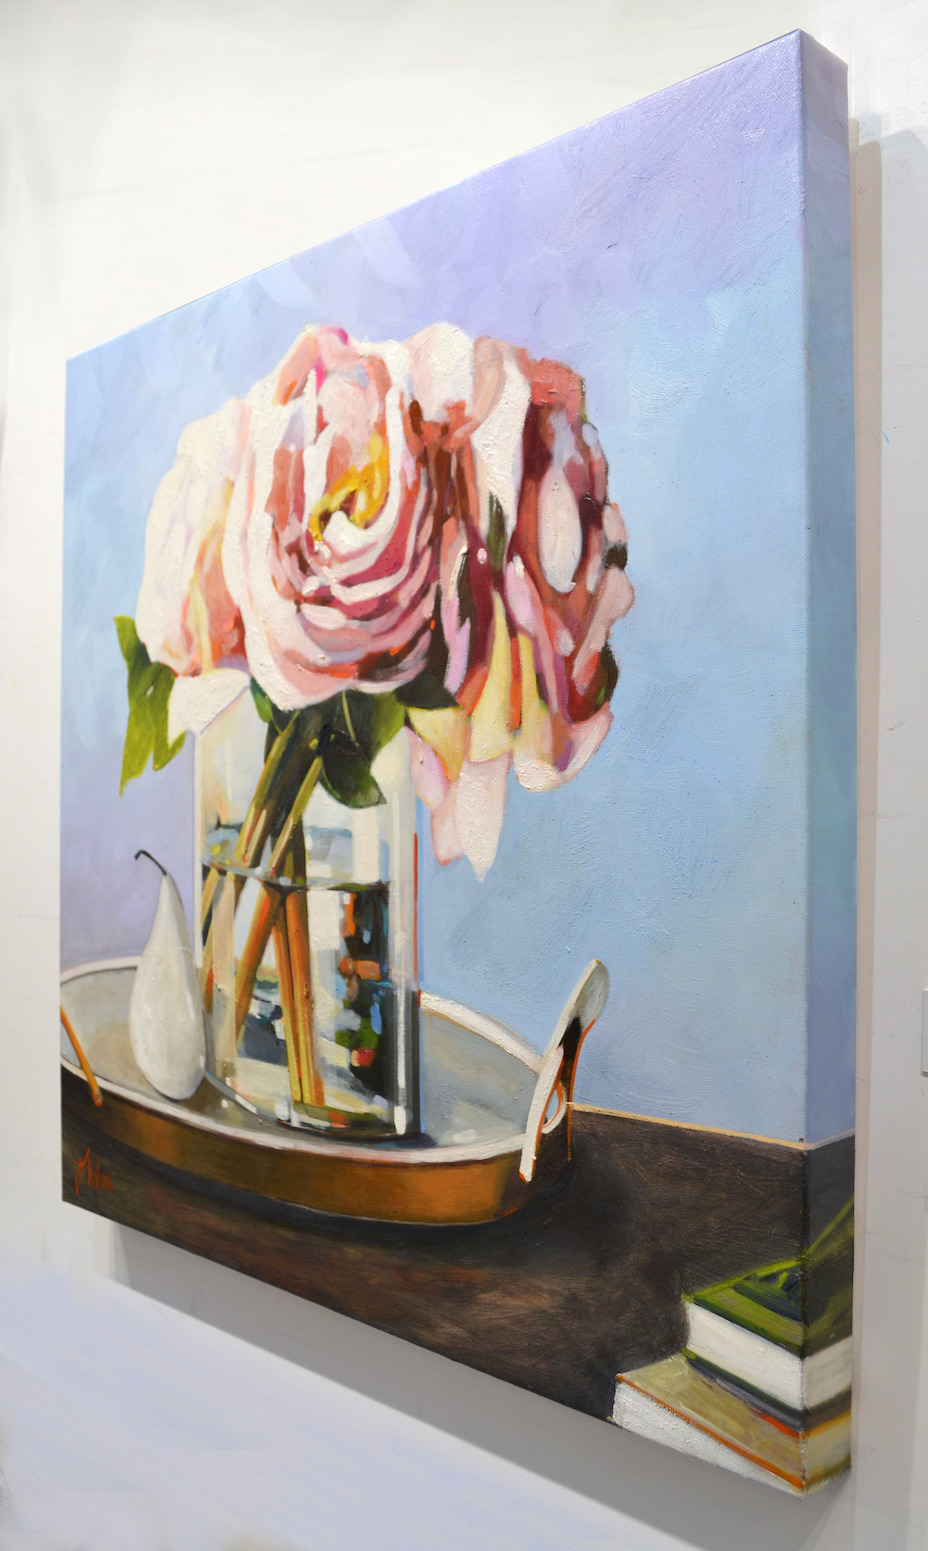 Side View Of Still Life Painting "Peonies with Decorative Pear" By Judith Dalozzo